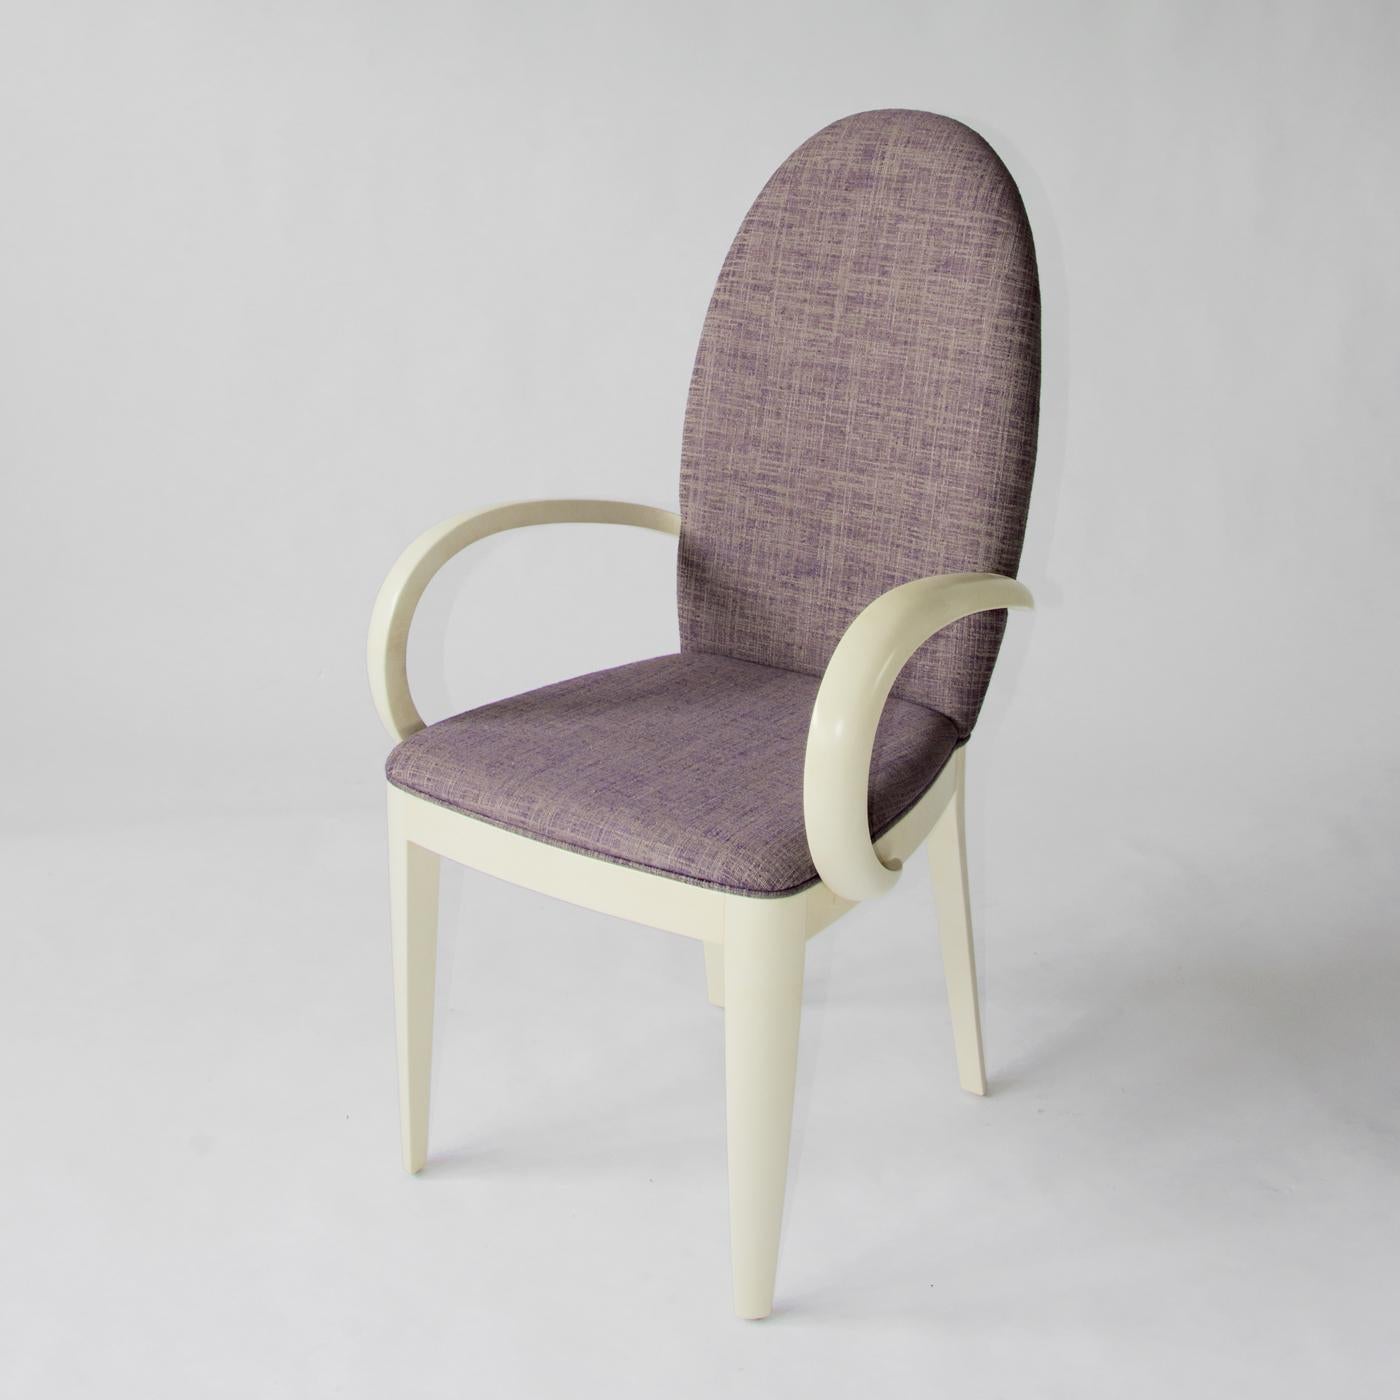 Characterized by a soft, curved design, the M&M chair with armrests has a structure made from wood with an ivory lacquered finish. The comfortable chair has been upholstered in a purple melange fabric and combined with the light tone of the wood